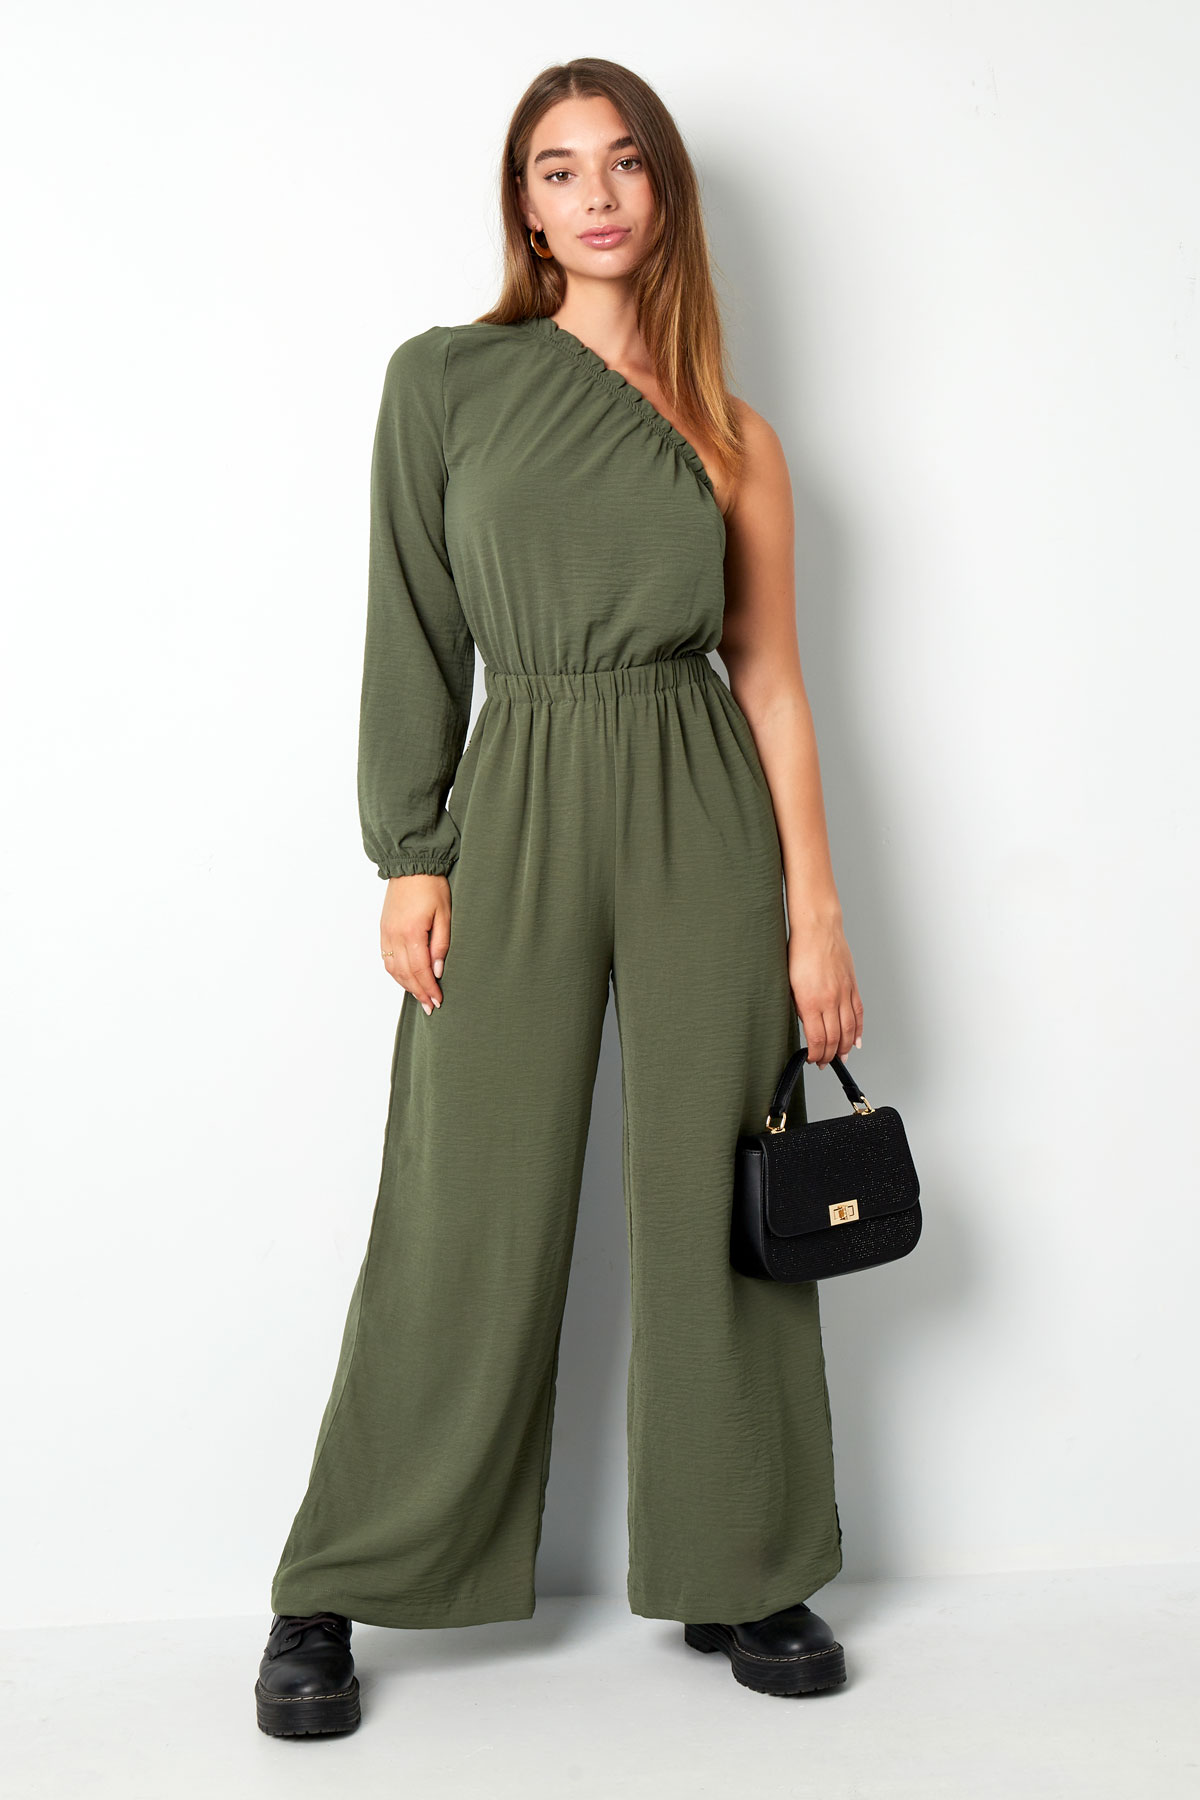 Jumpsuit one-shoulder - mustard yellow Picture5